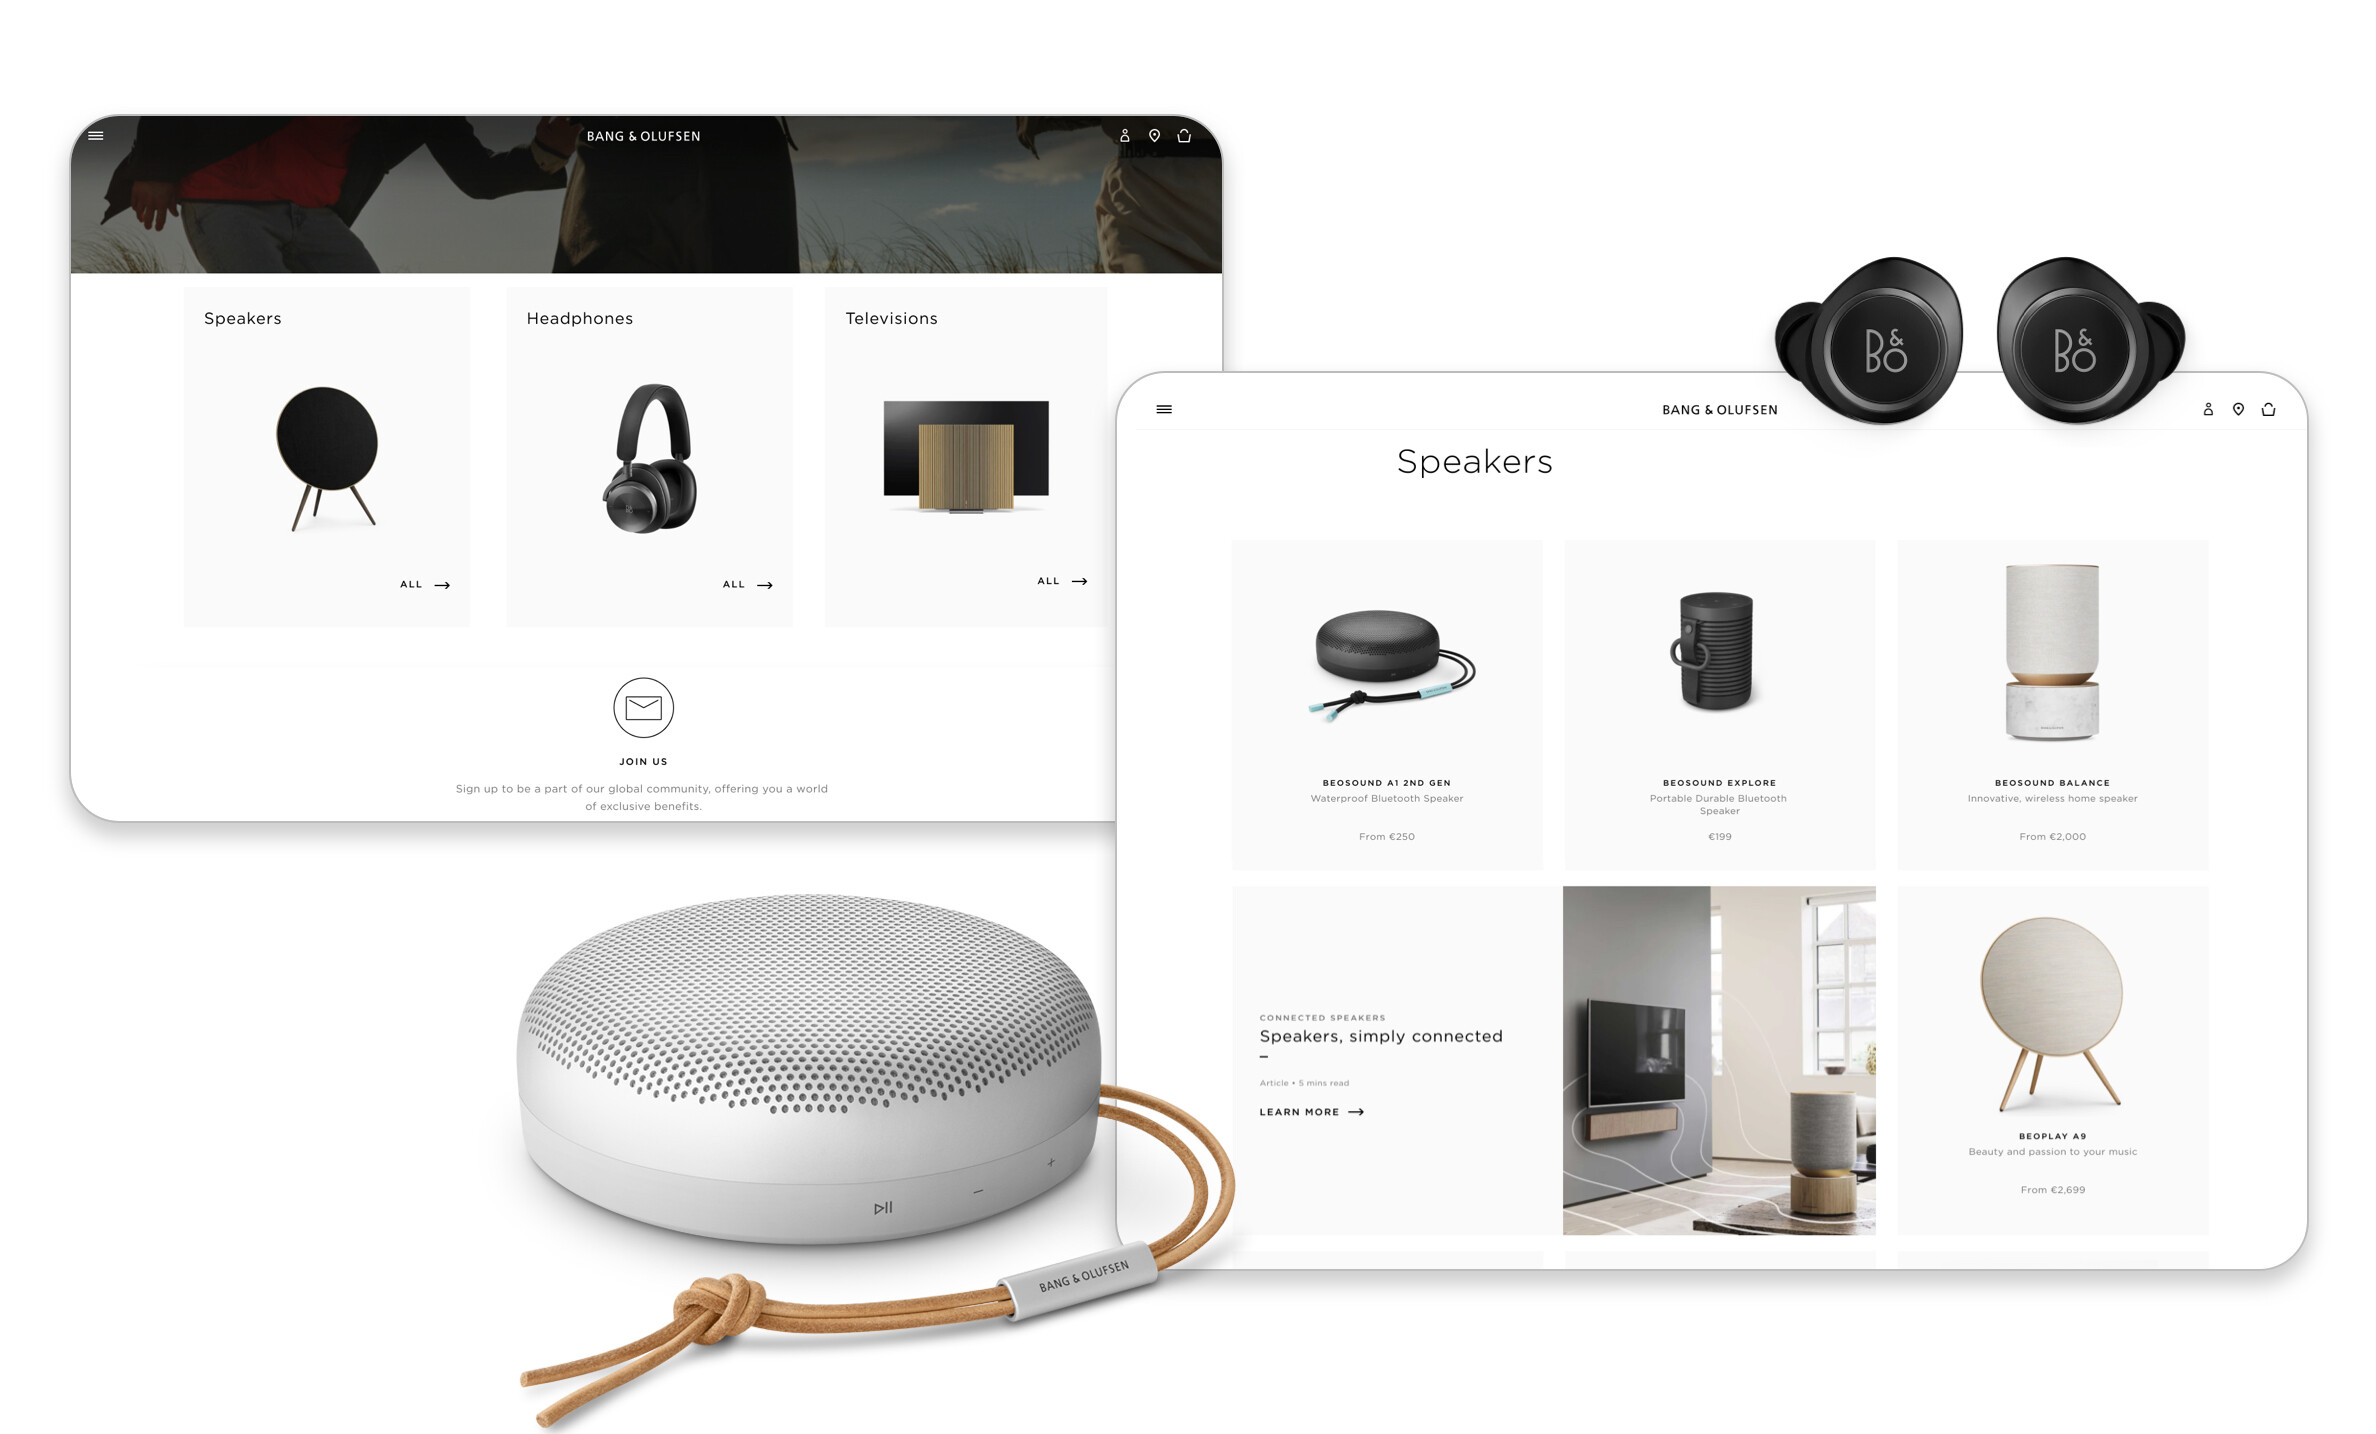 Bang & Olufsen's new eCommerce gives them the flexibility to integrate all sales channels into a single omnichannel strategy